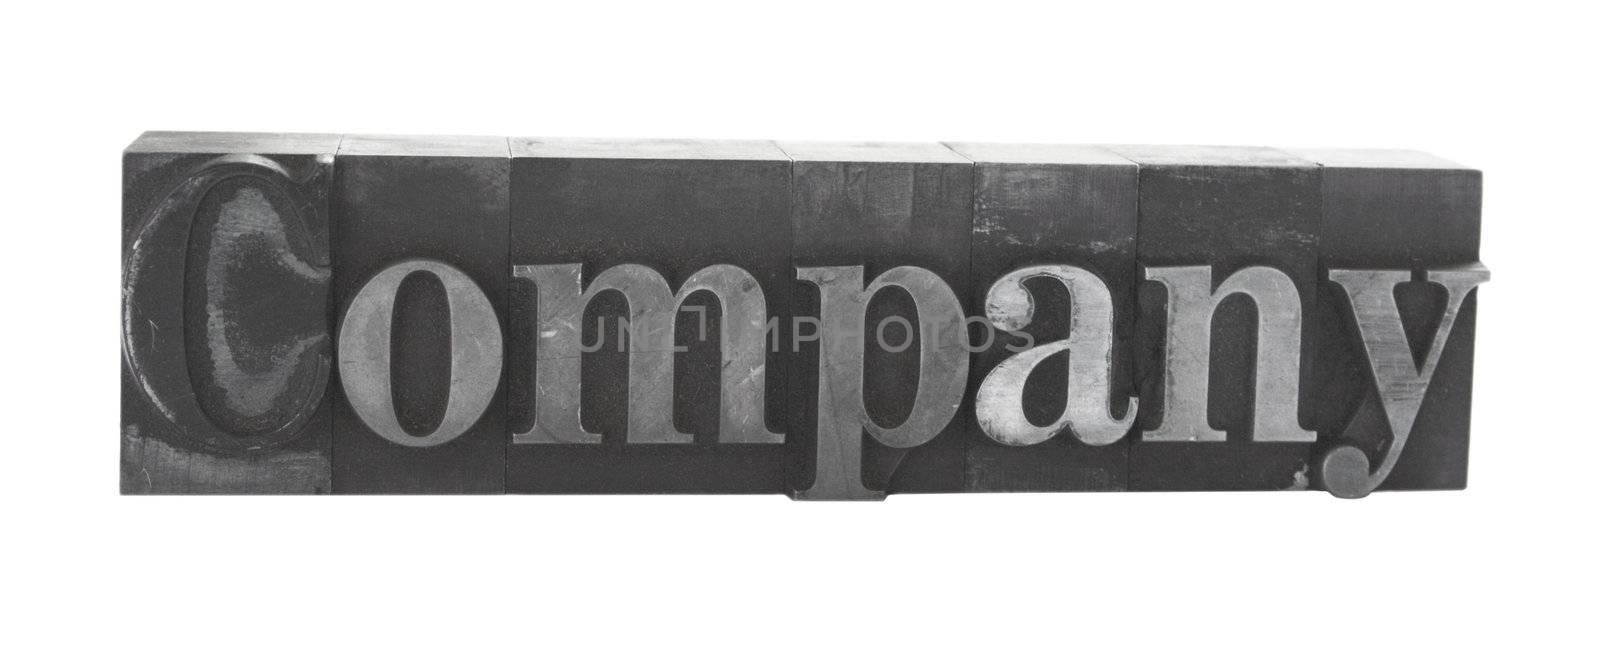 old, ink-stained metal letterpress type spells out the word 'company' isolated on white